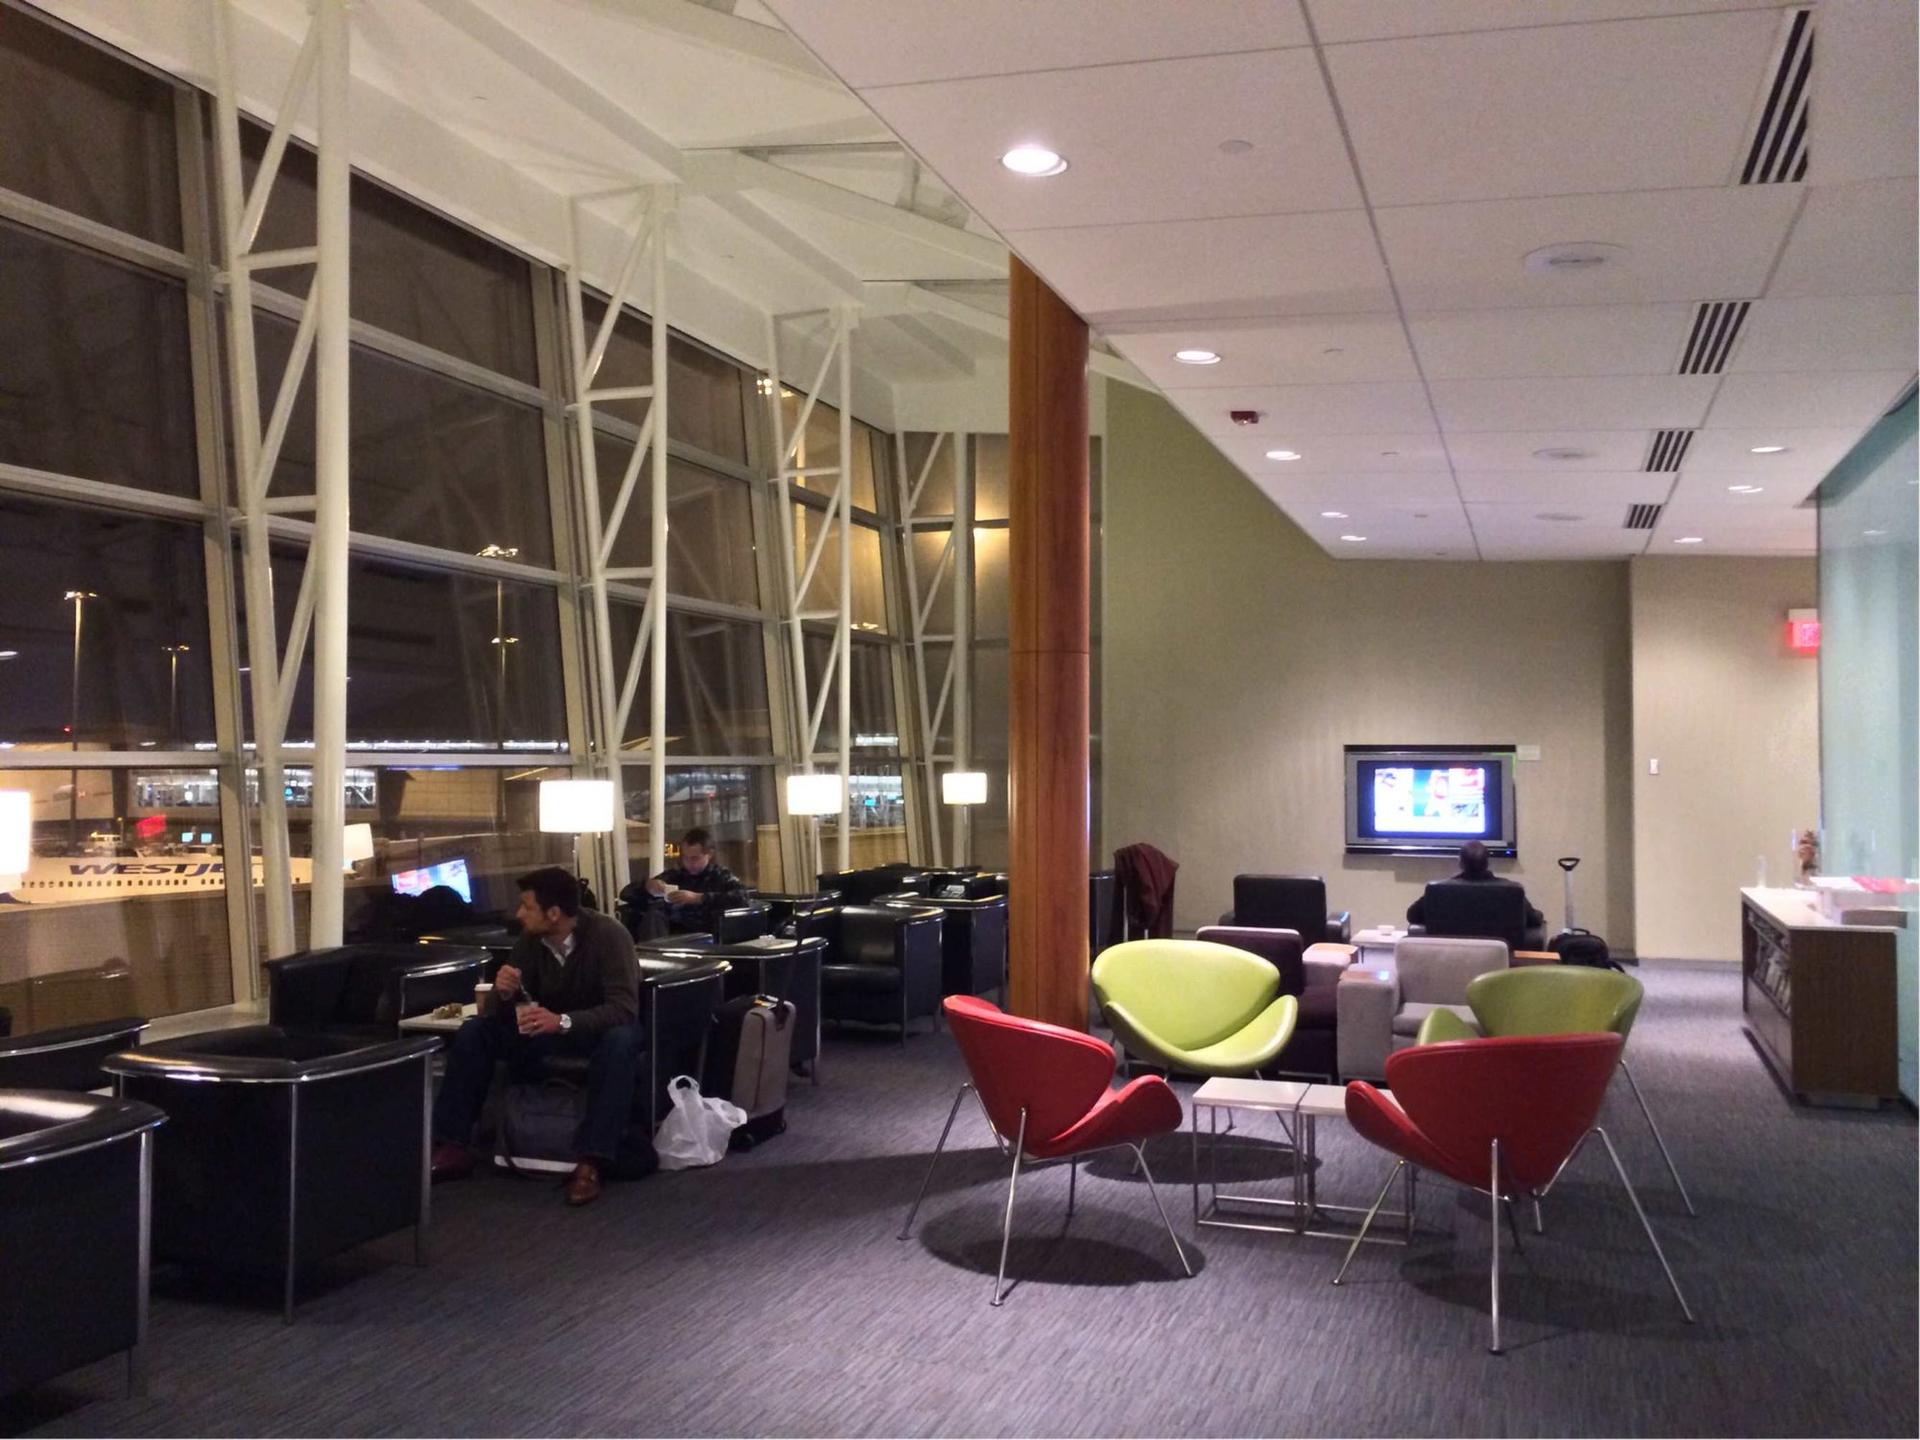 Air Canada Maple Leaf Lounge image 2 of 12